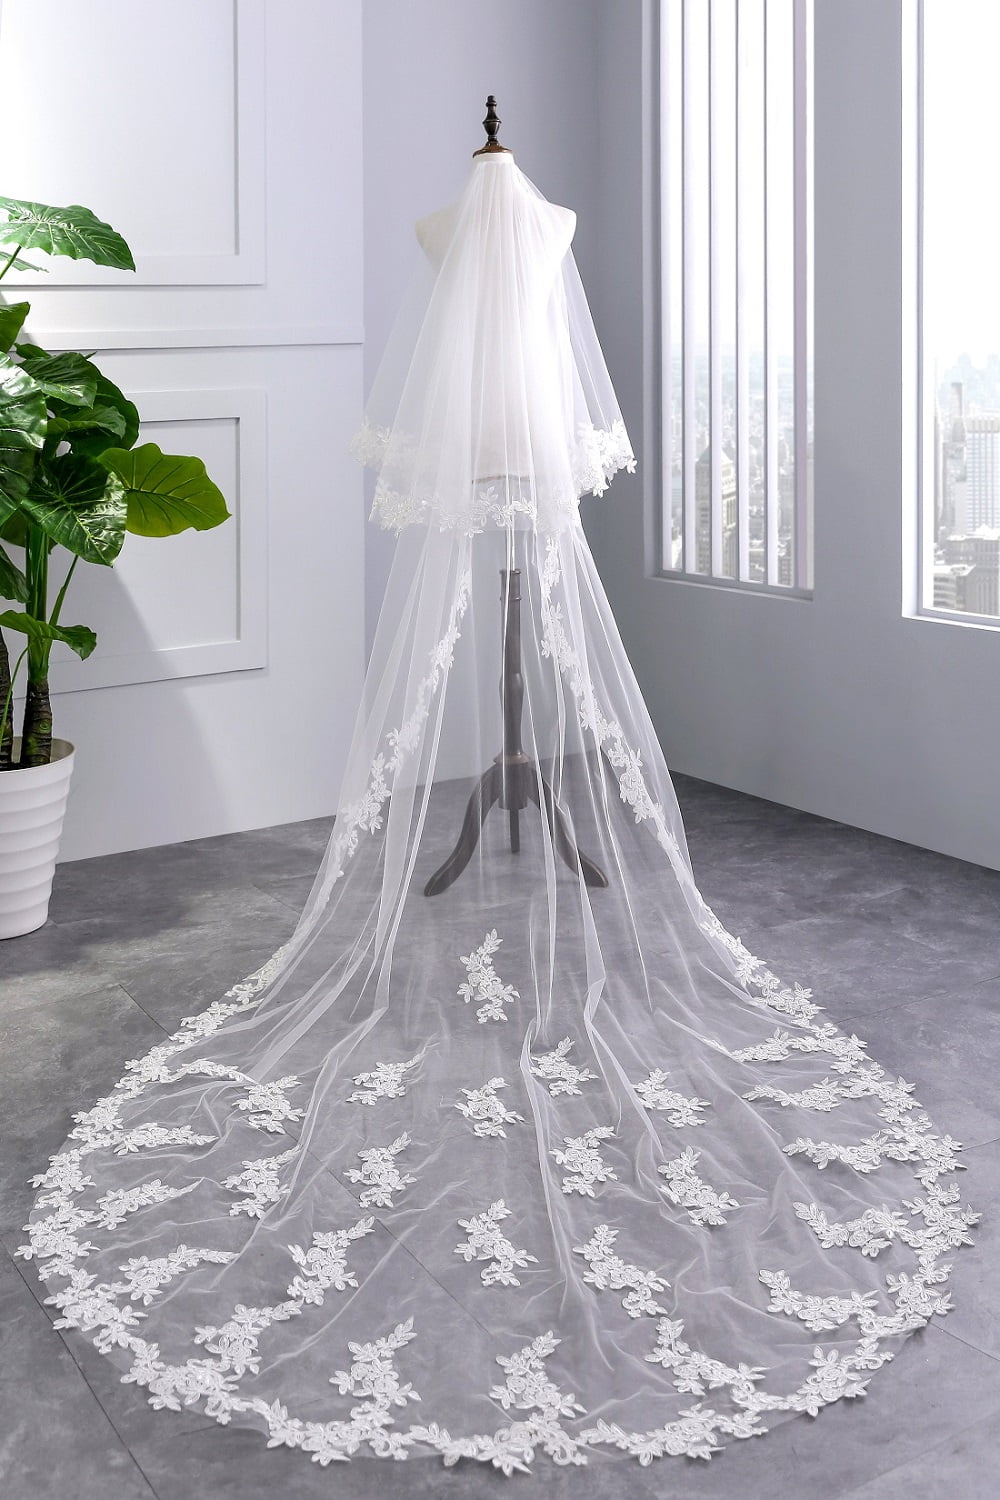 Elliewely 2 Tier Wedding Veil Chapel Length 3 M(118 inch) Plain Tulle Bridal Veil with Metal Comb E22 Ivory, Size: 2 T(First Tier :300cm/118inch